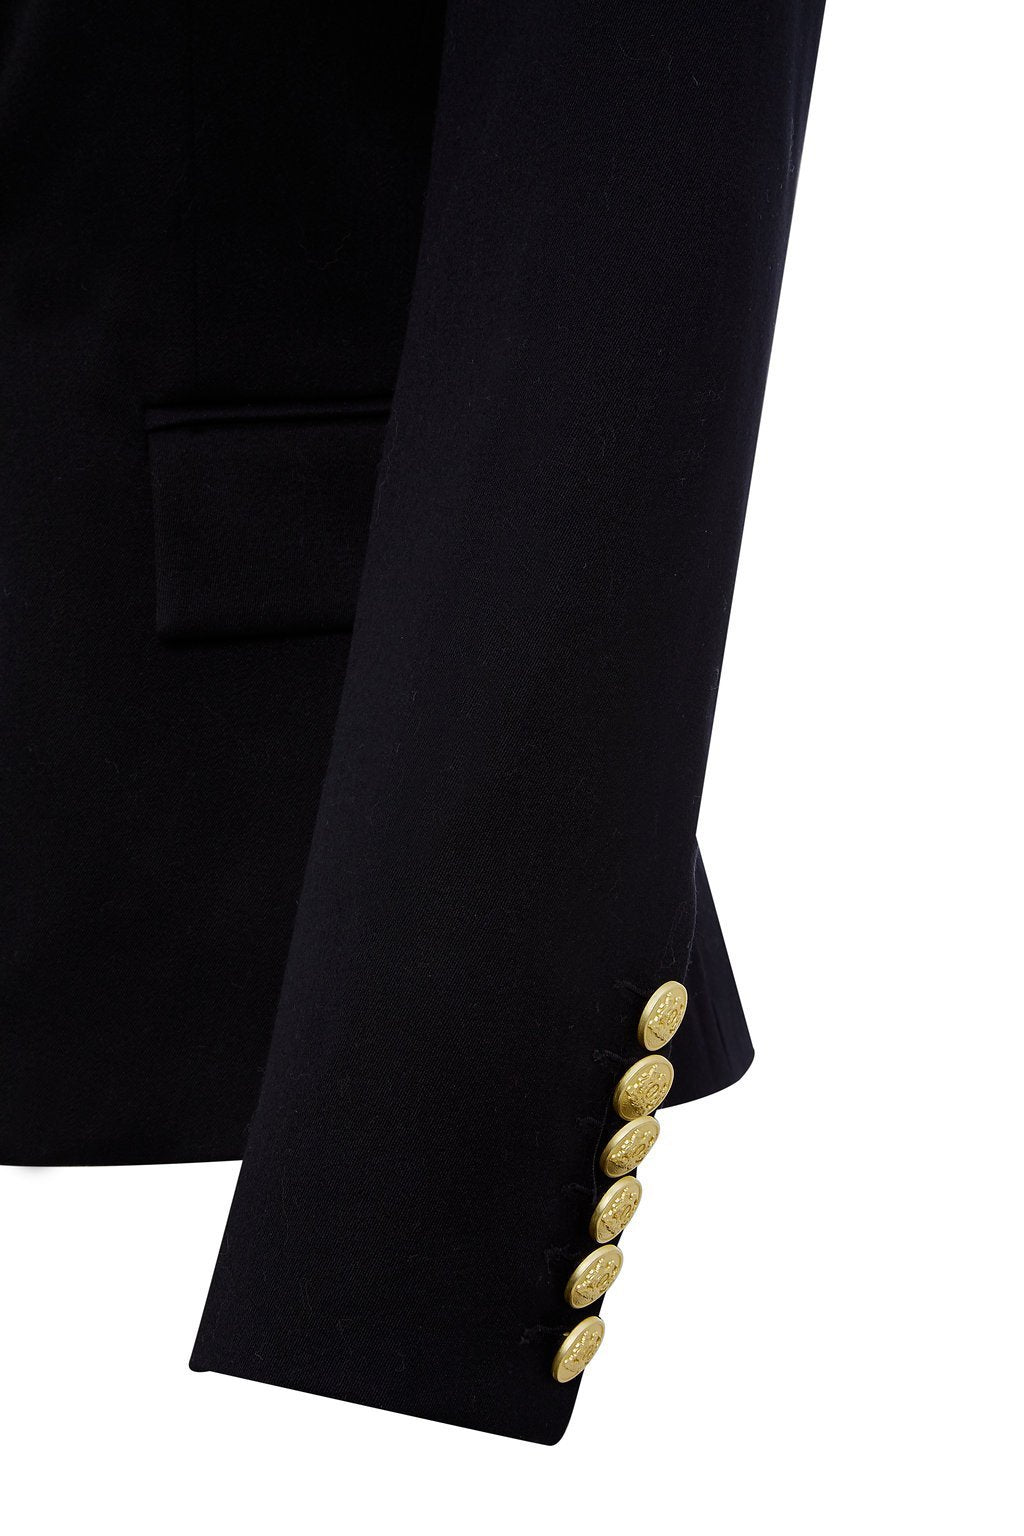 gold button detail on sleeve of British made double breasted blazer that fastens with a single button hole to create a more form fitting silhouette with two pockets and gold button detailing this blazer is made from black barathea